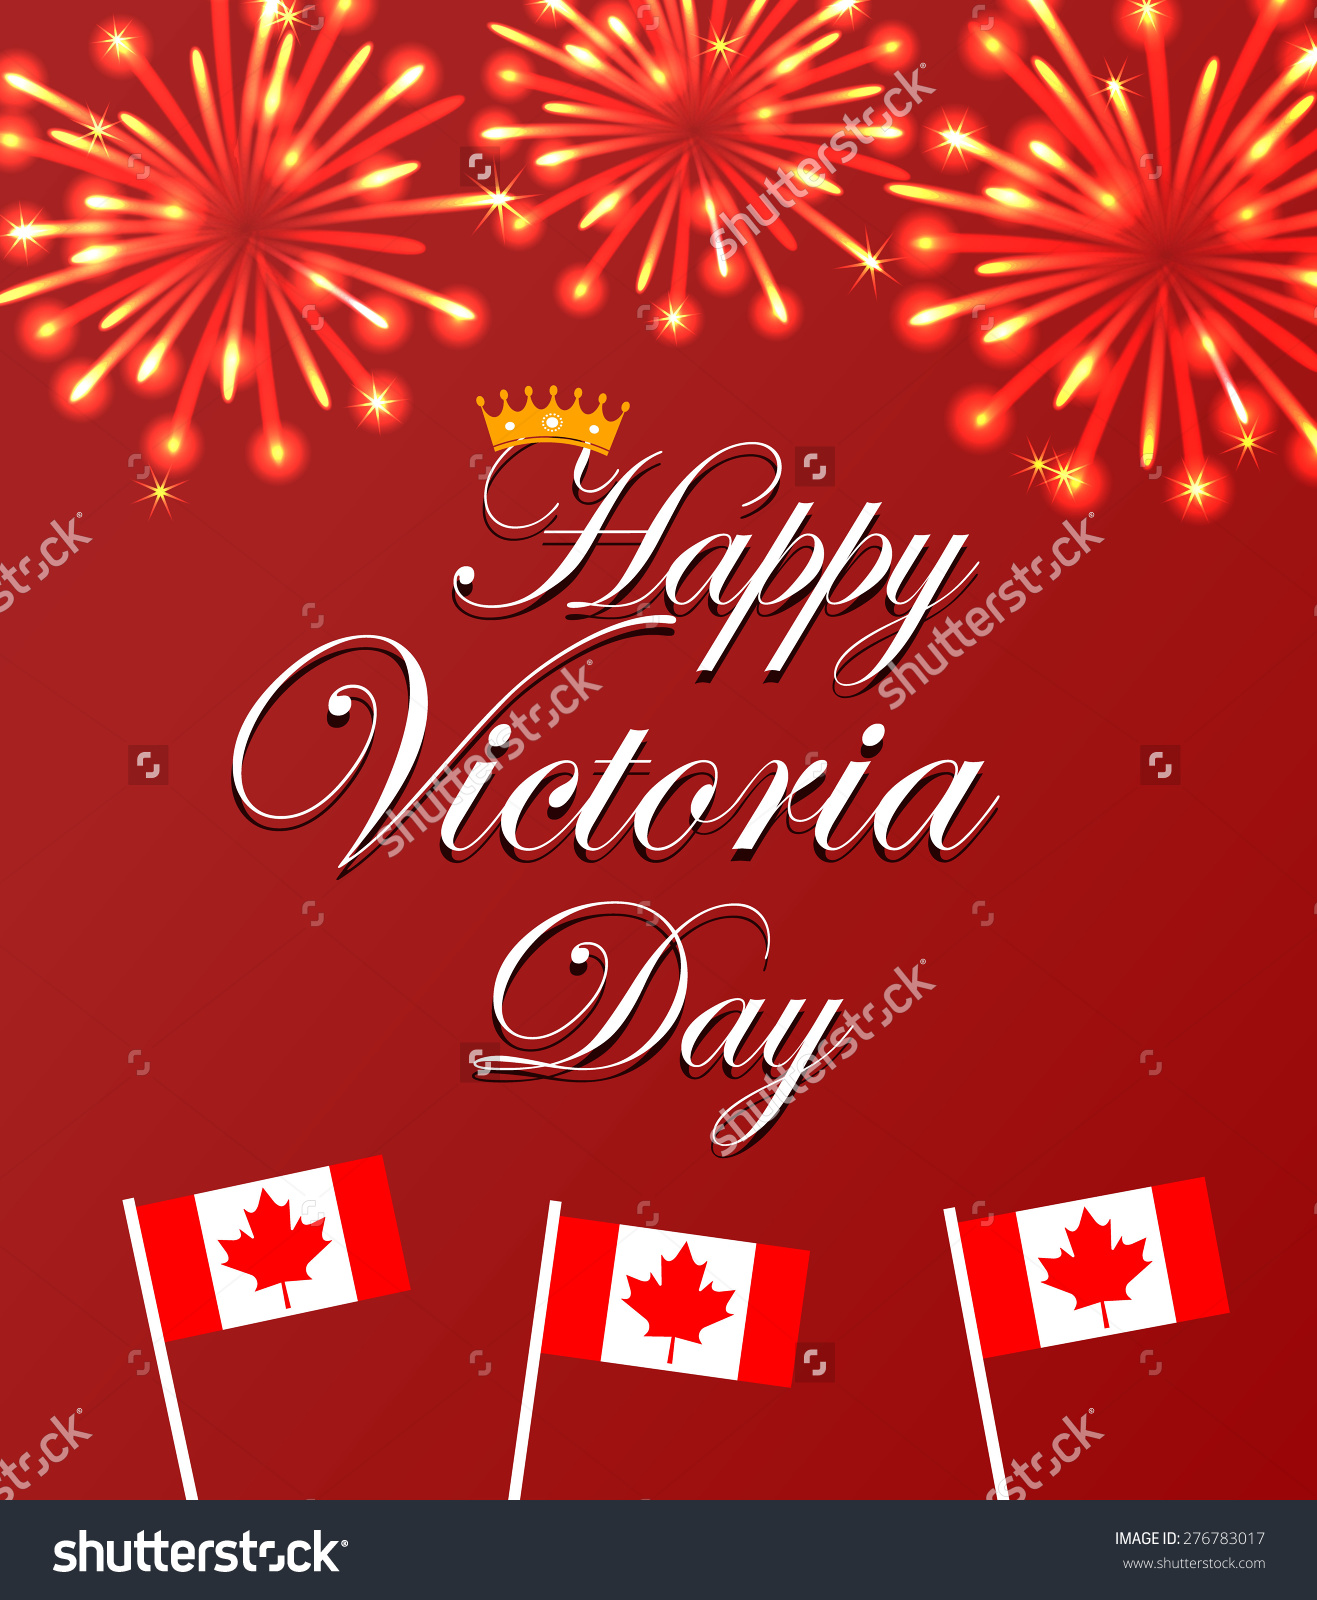 Happy Victoria Day Card With Canada Flags And Fireworks